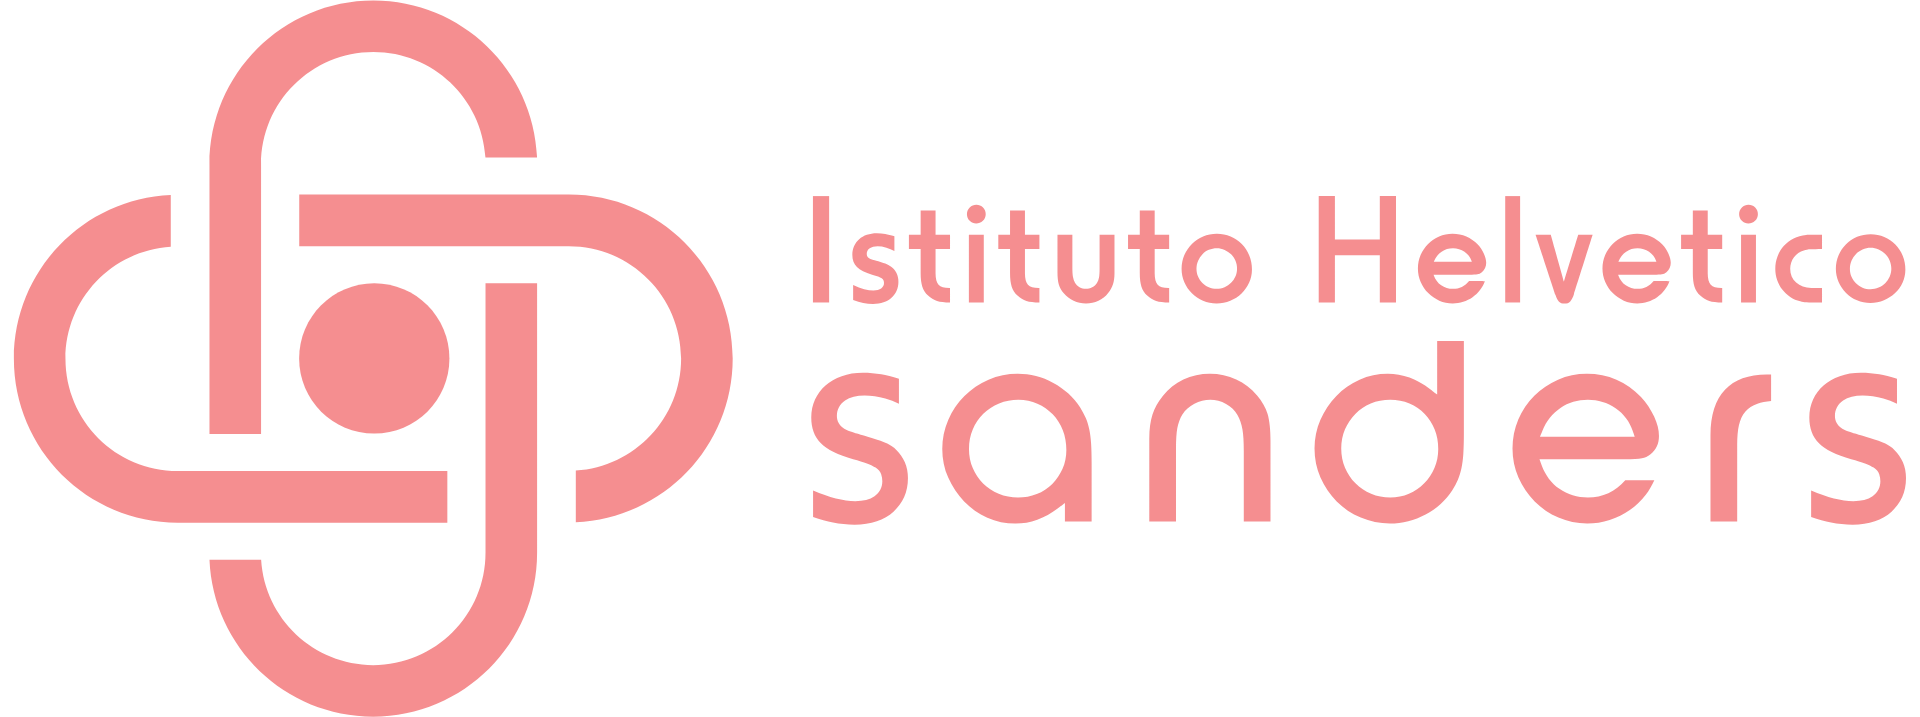 Simmat counts Istituto Helvetico Sanders among its clients.